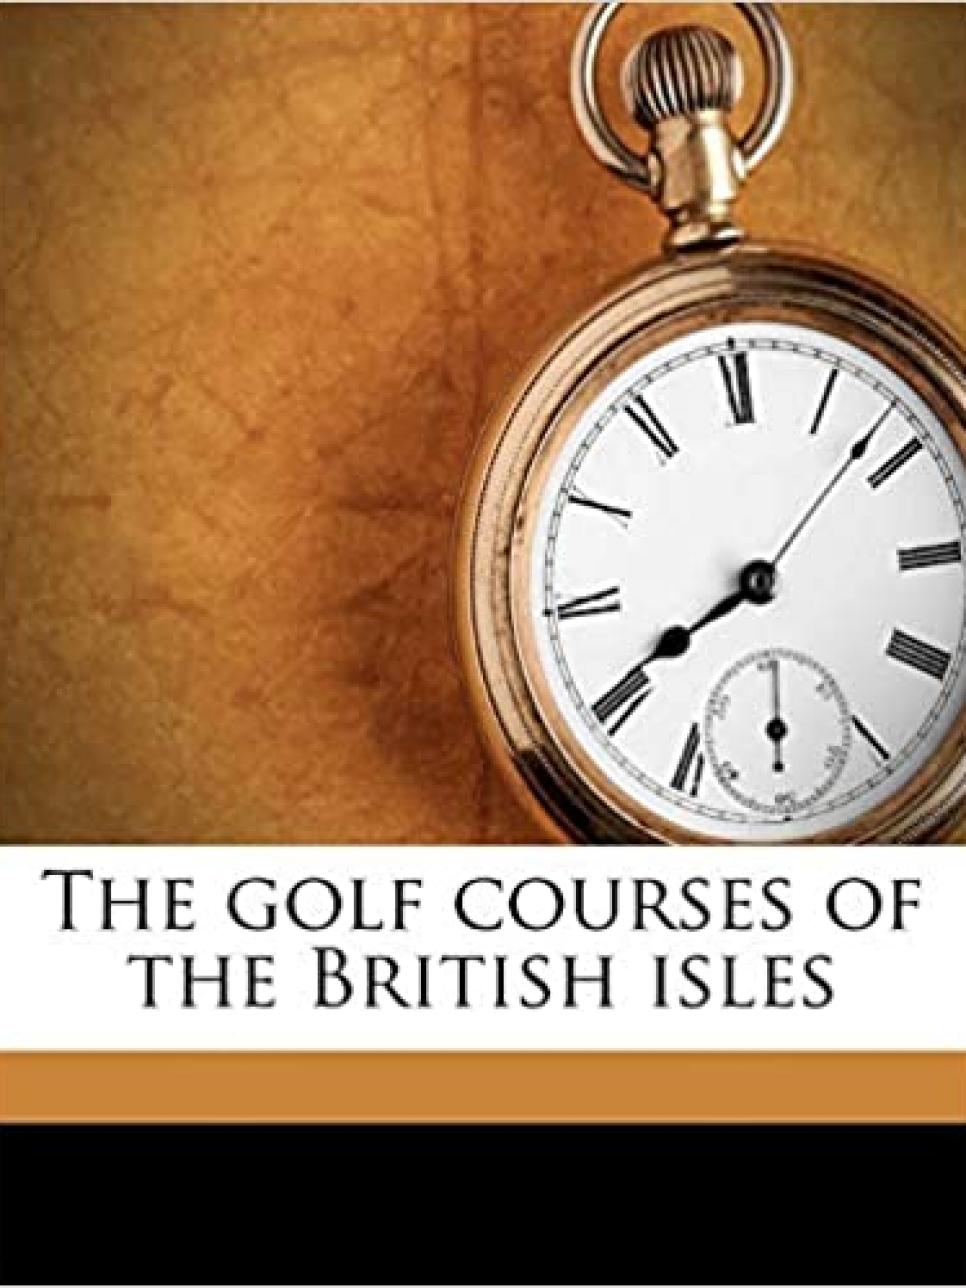 The Golf Courses of the British Isles By Bernard Darwin (1910)